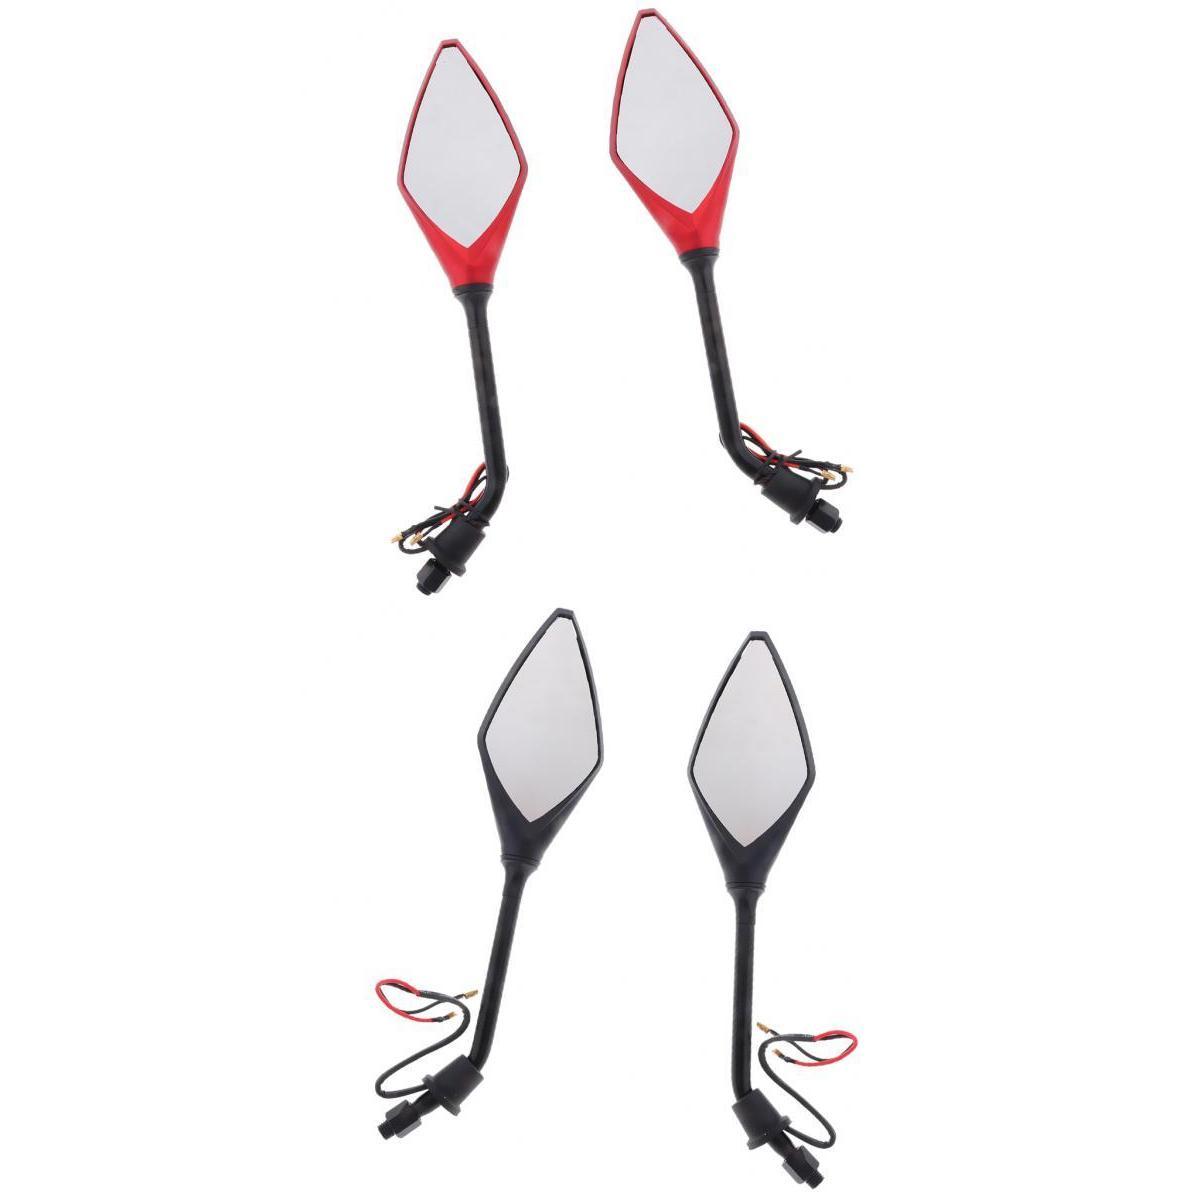 4X Motorcycle Side Rear View Mirrors w/ LED  10mm Indicator Light